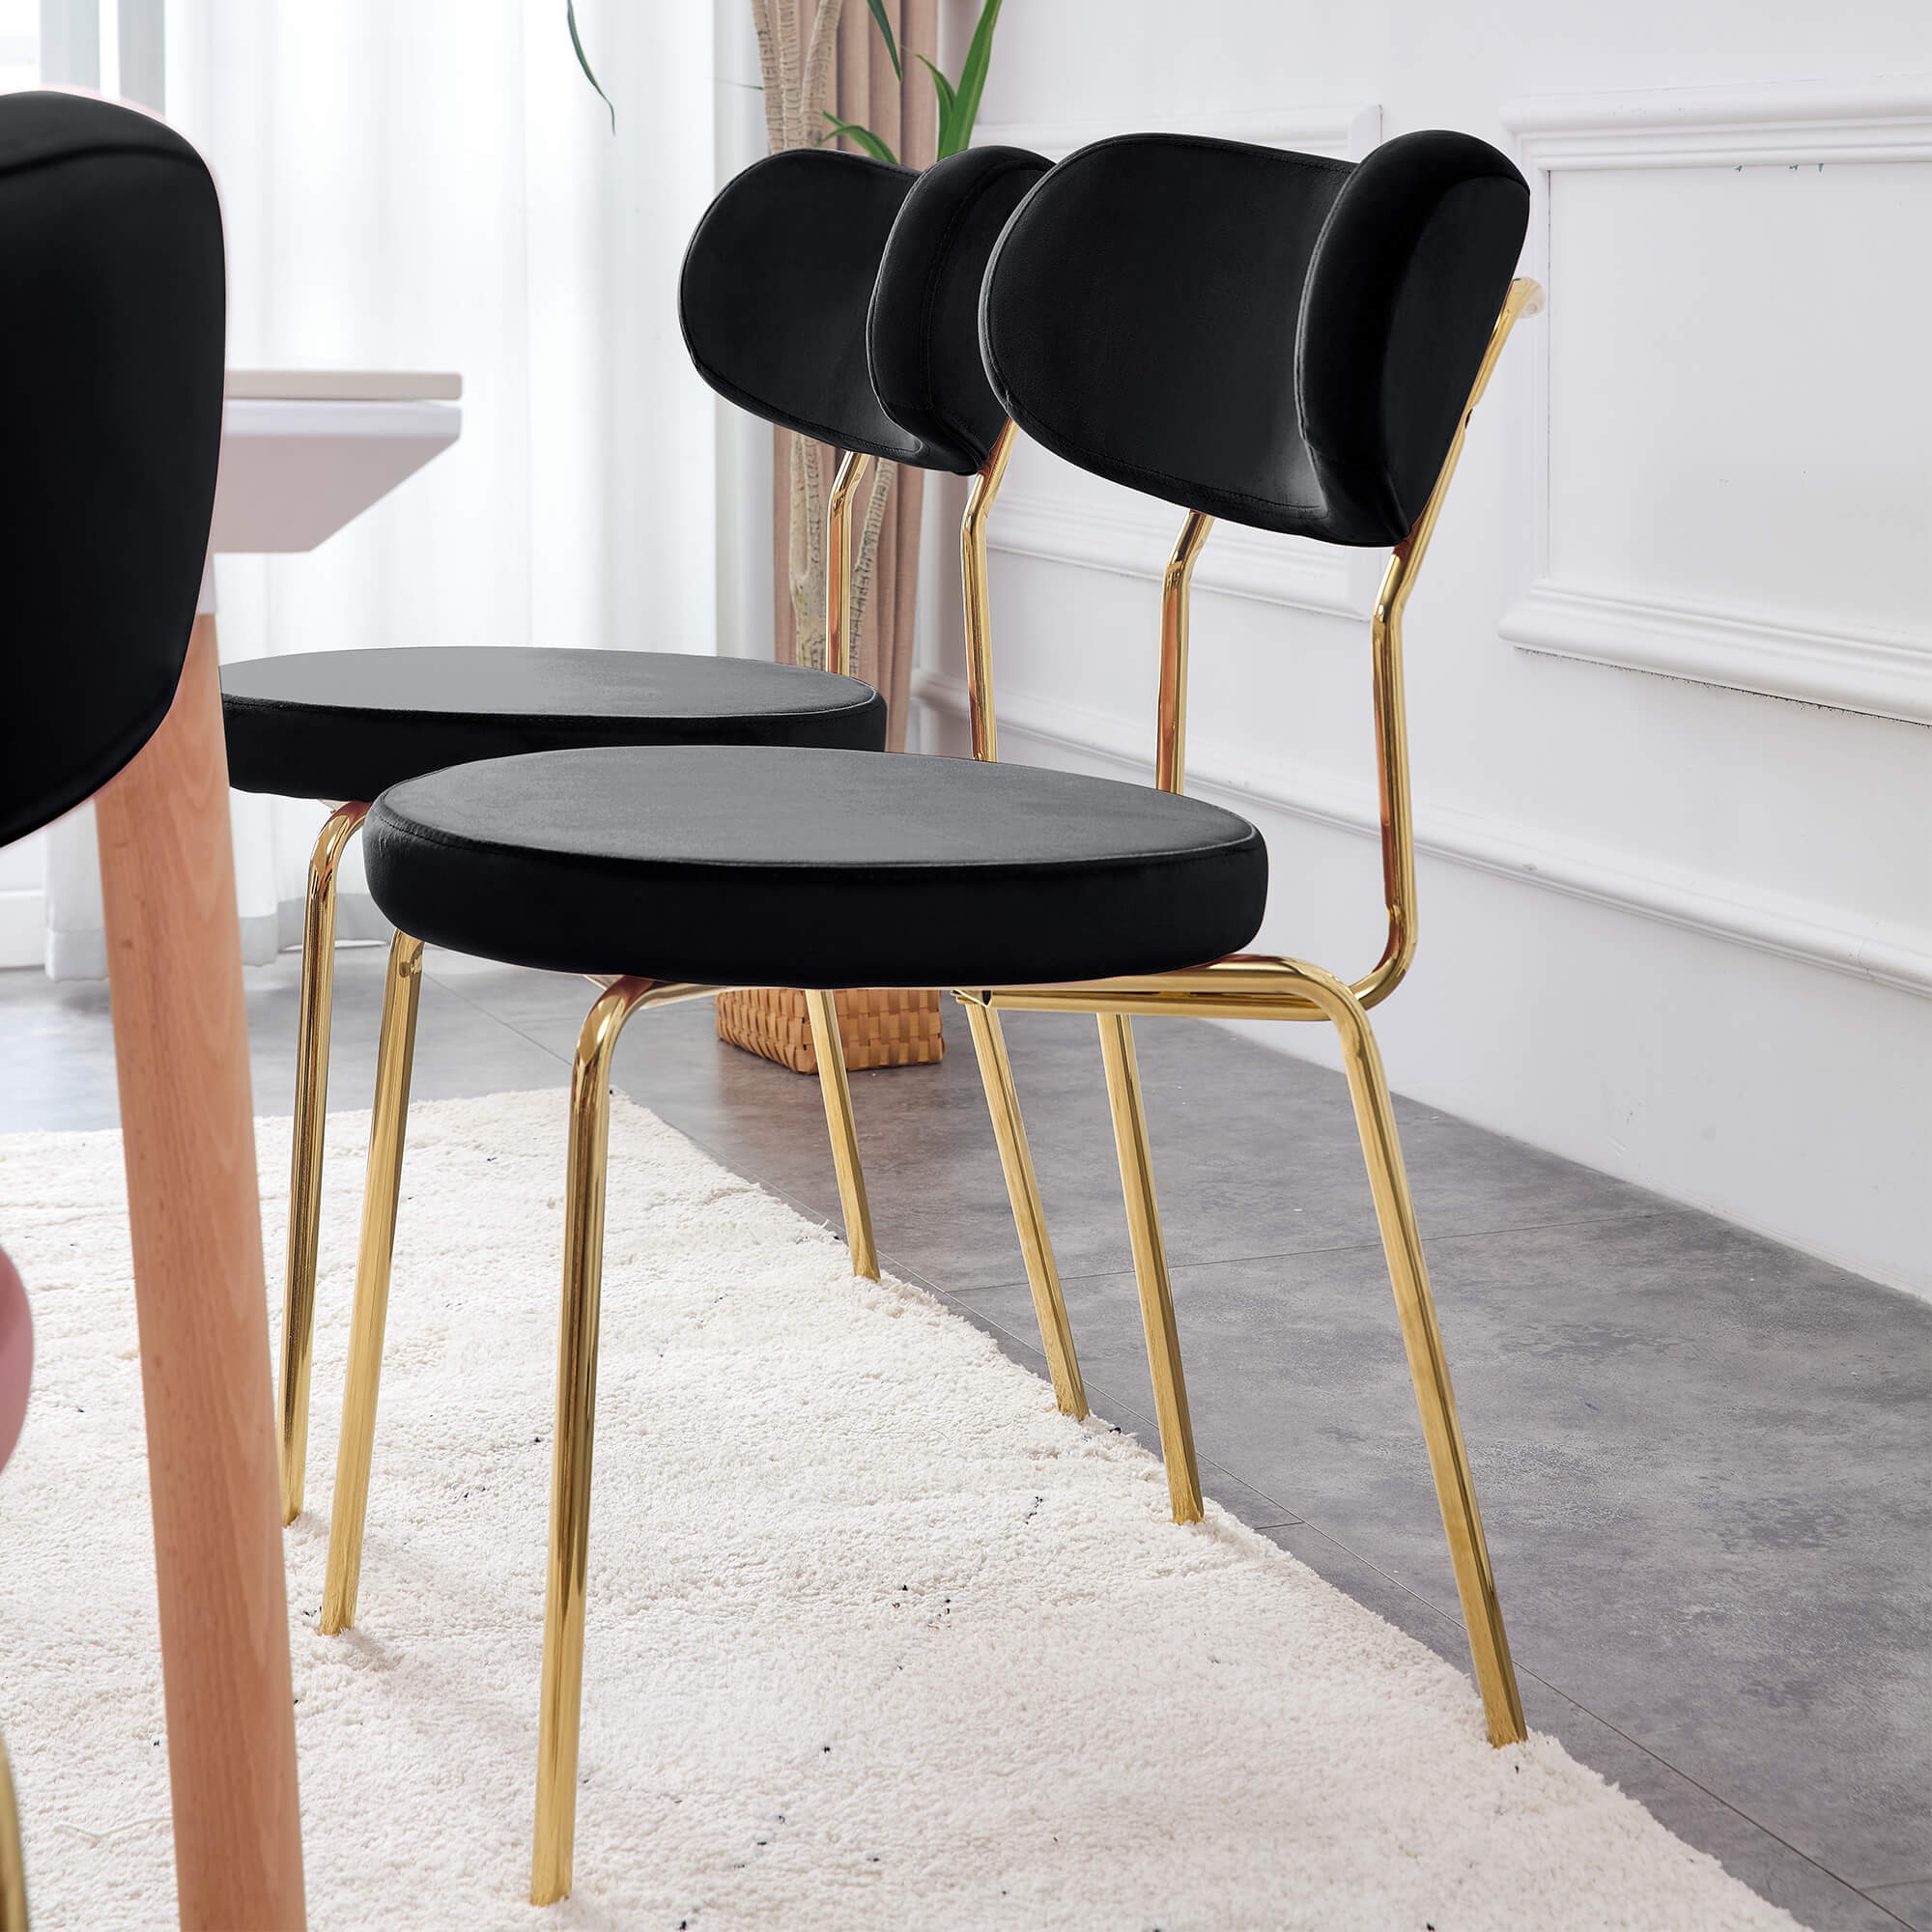 Ivinta Dining Chair Set of 4, Modern Black Velvet Chairs with Golden Legs, Mid Century Side Chairs for Dining Room